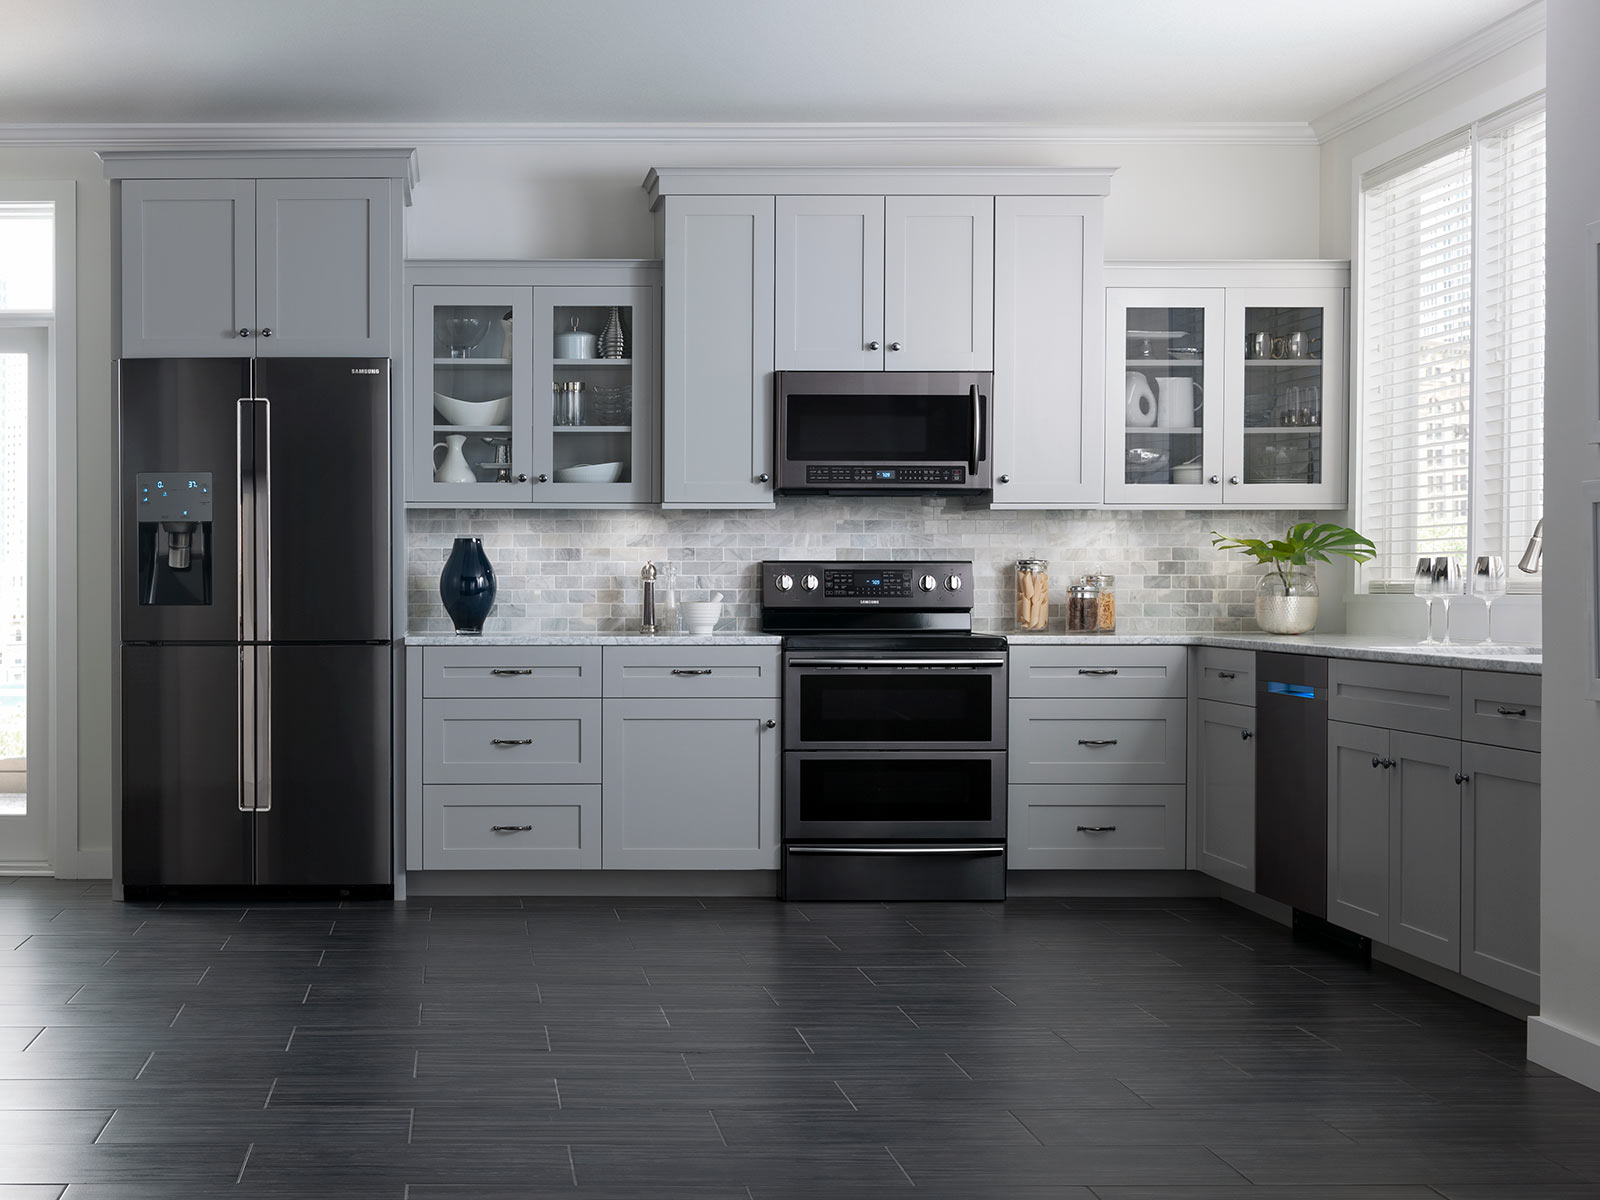 Thumbnail image of 5.9 cu. ft. Freestanding Electric Range with Flex Duo™ & Dual Door in Black Stainless Steel